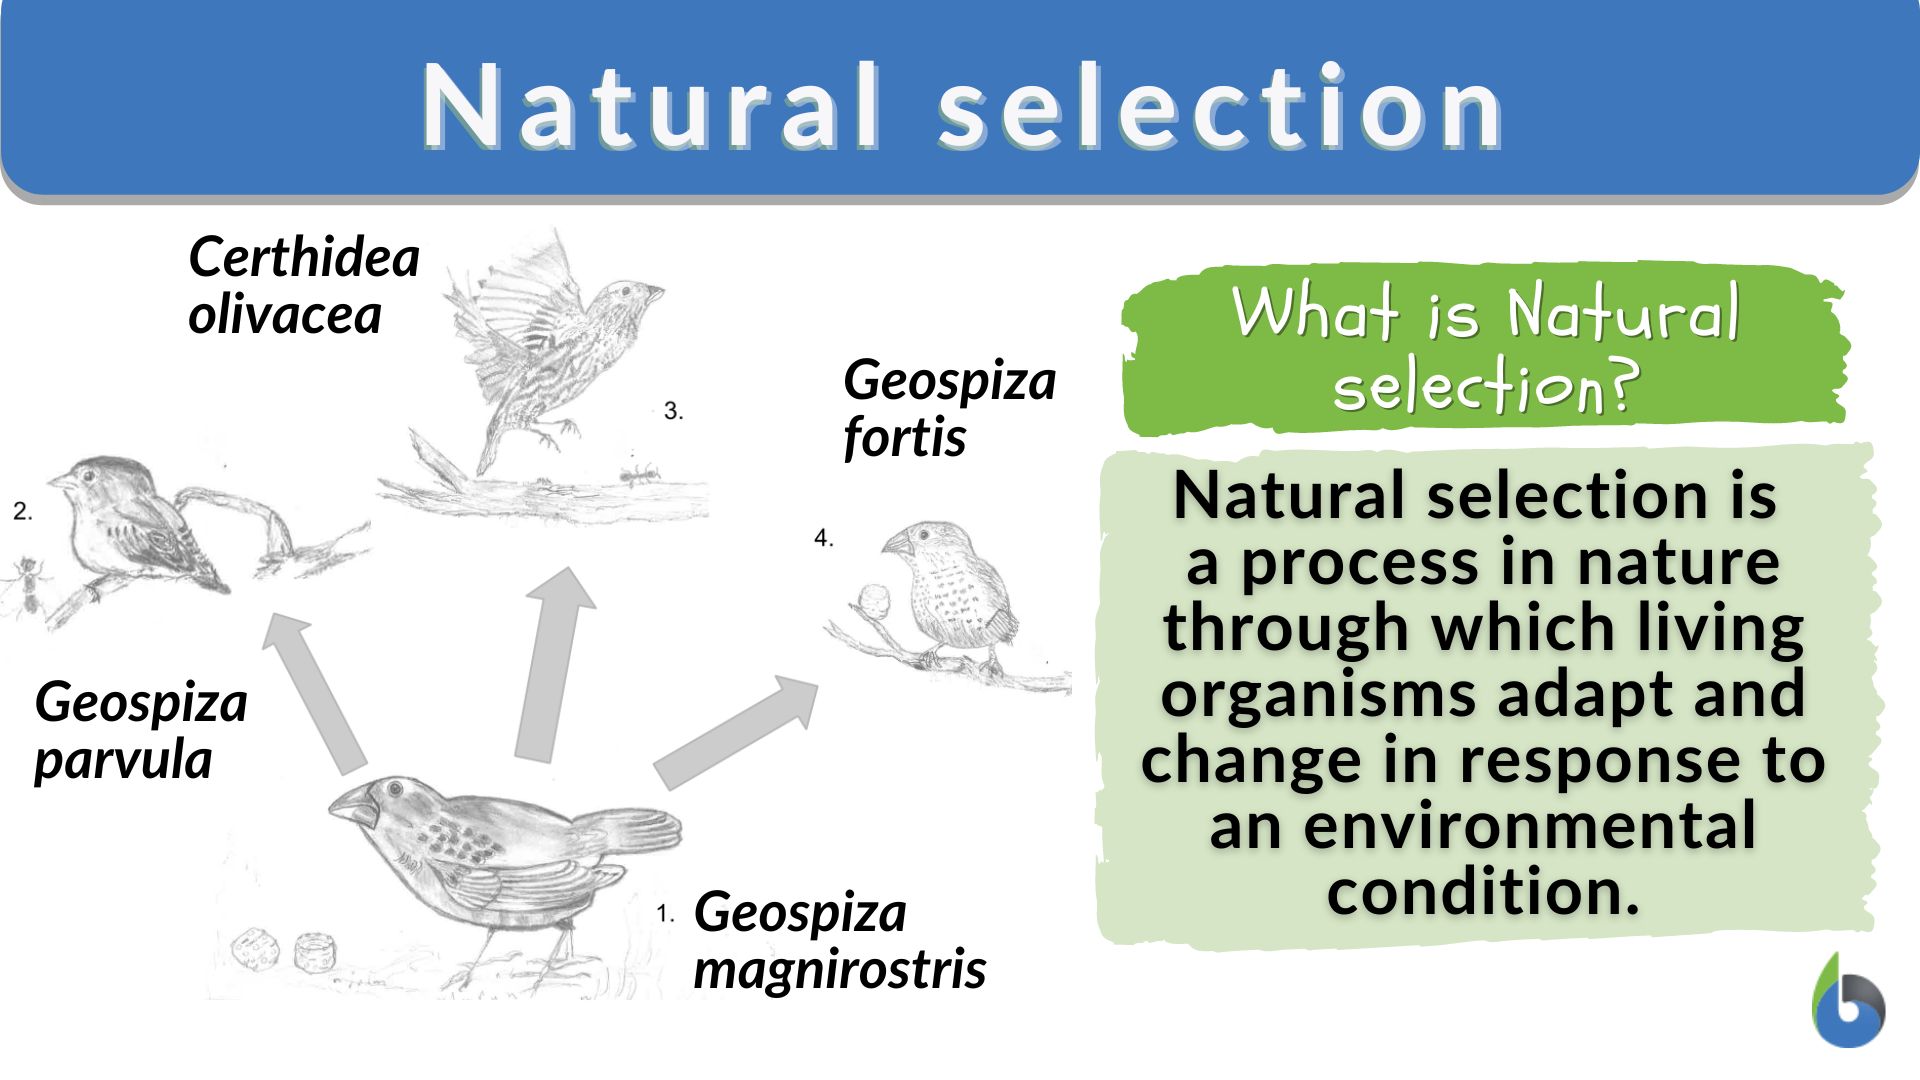 hypothesis for natural selection